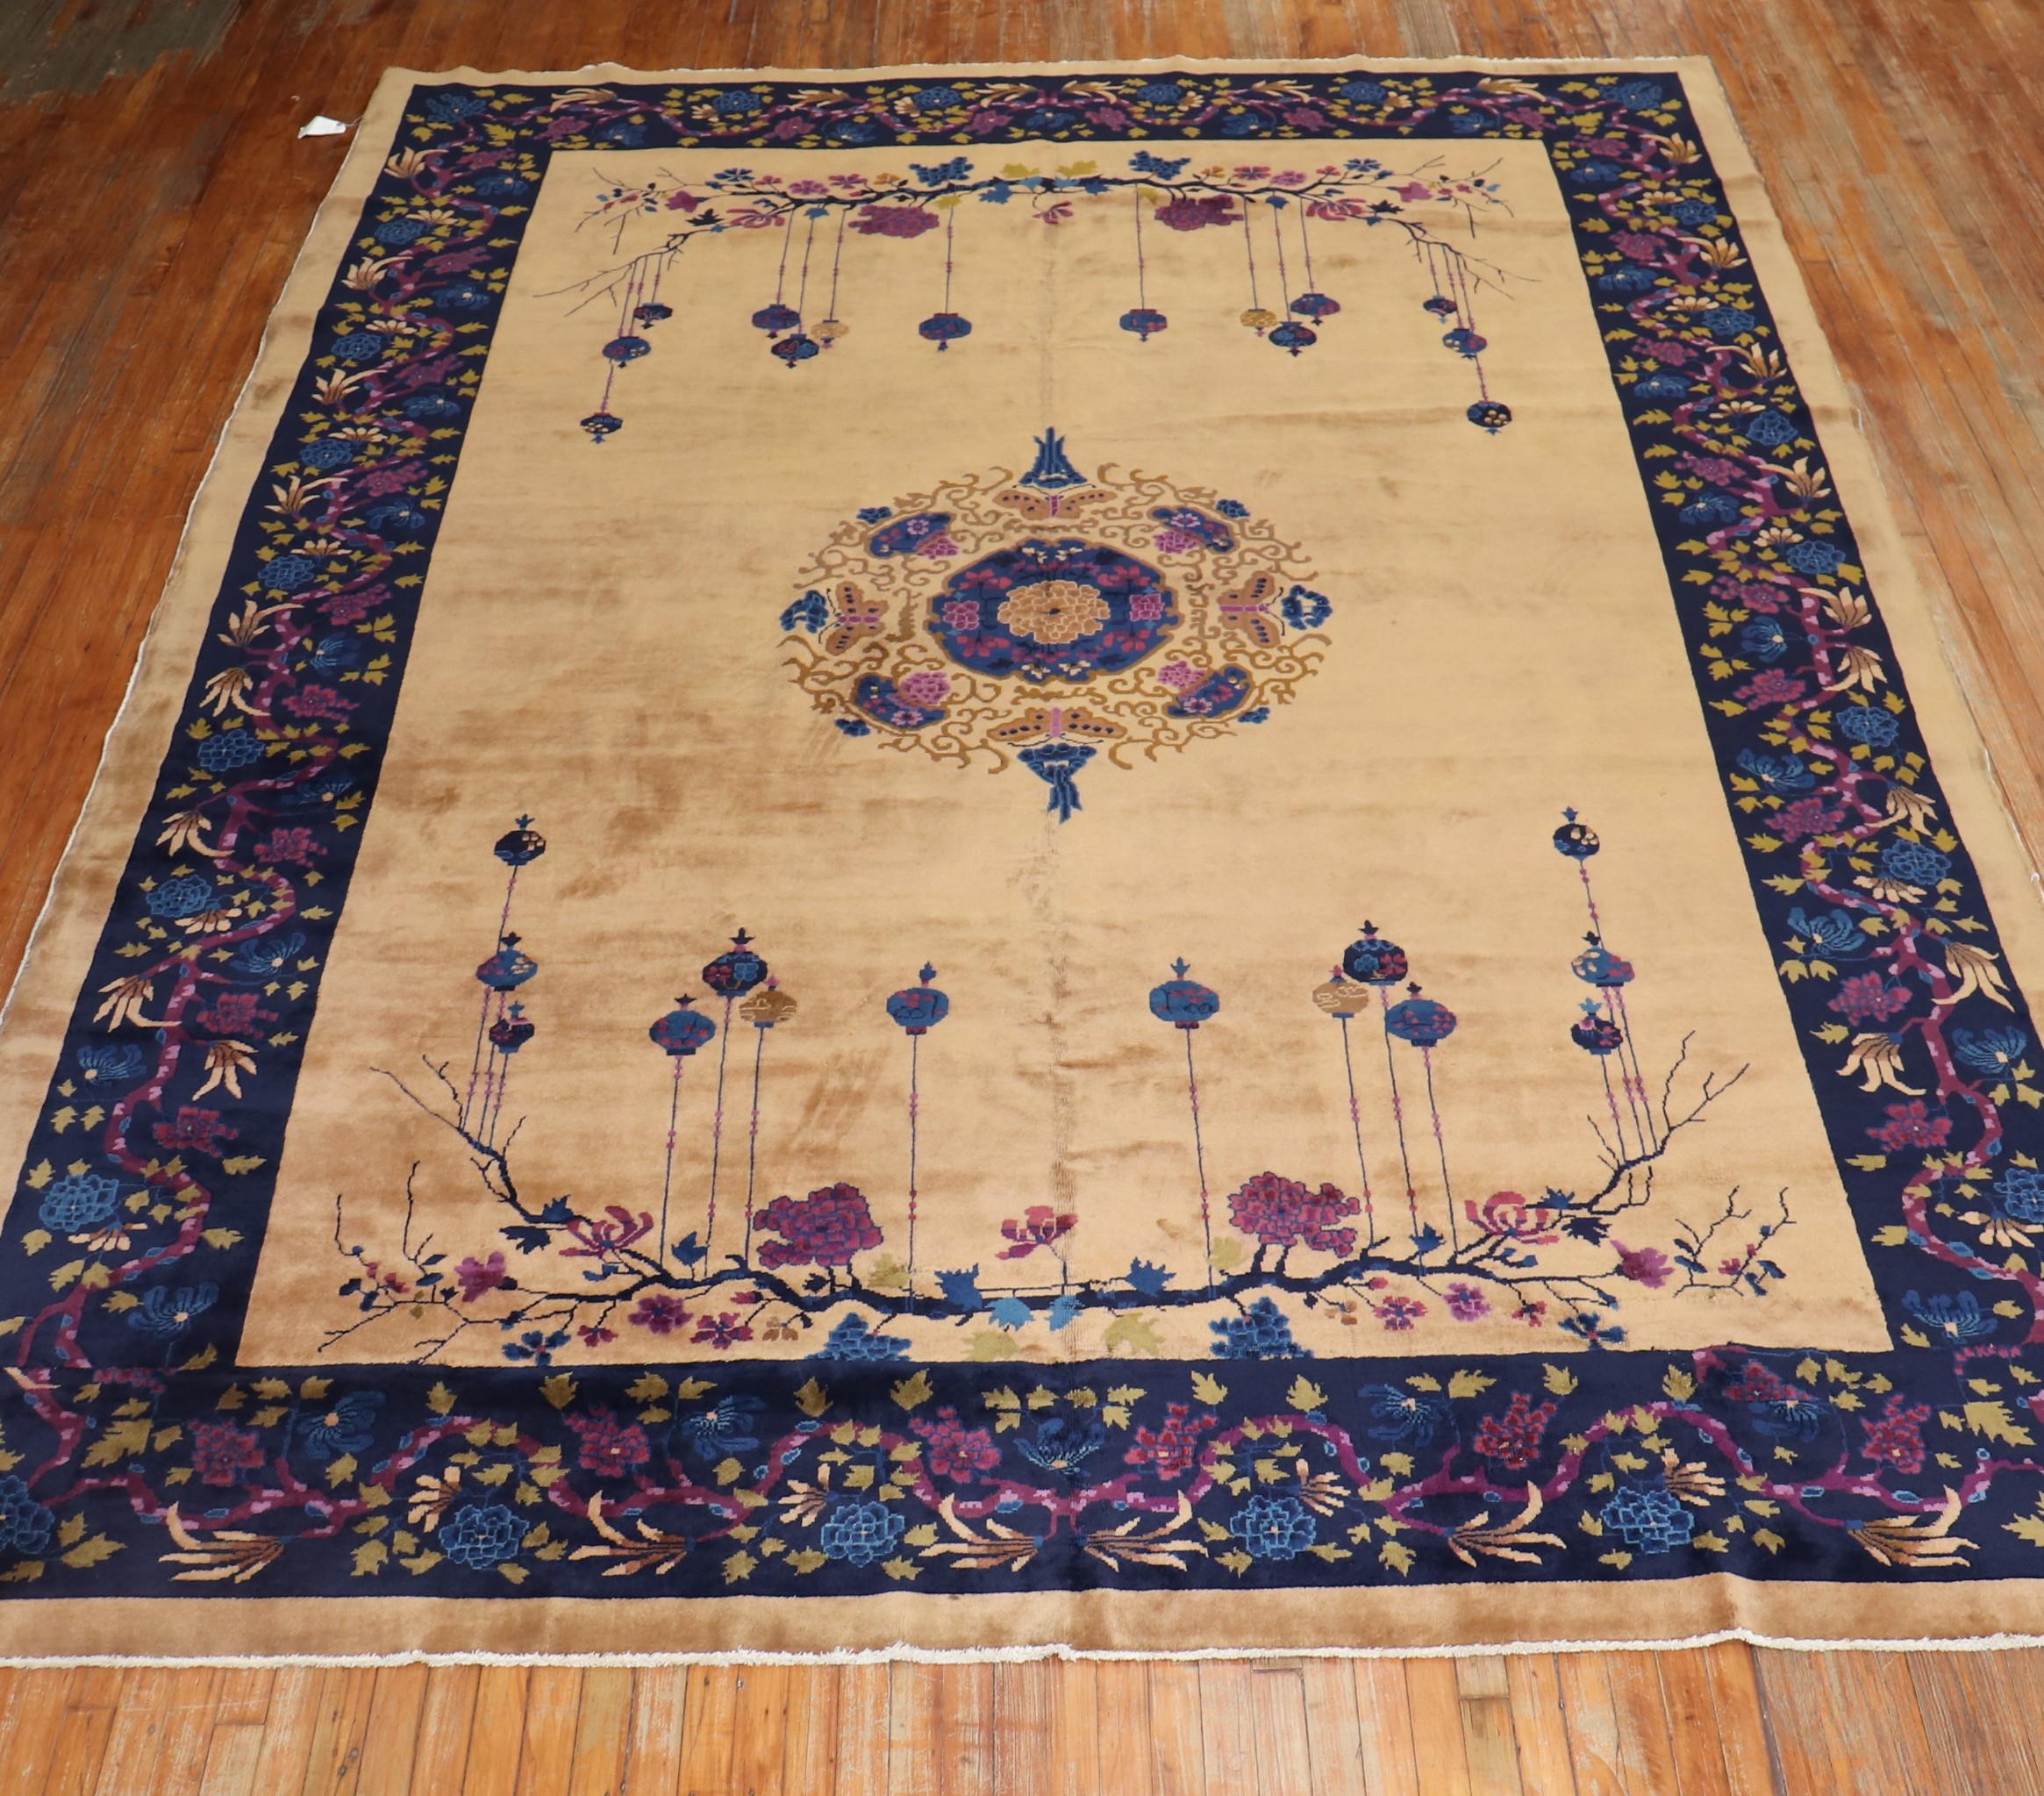 An authentic mid-20th century Chinese Art Deco with an enchanting floral motif in predominant plum, wine, navy blue accents on a beige ground.
Room size formats are usually found in the 8 x 10, 9 x 12 size range, this one is slightly shy of 10 x